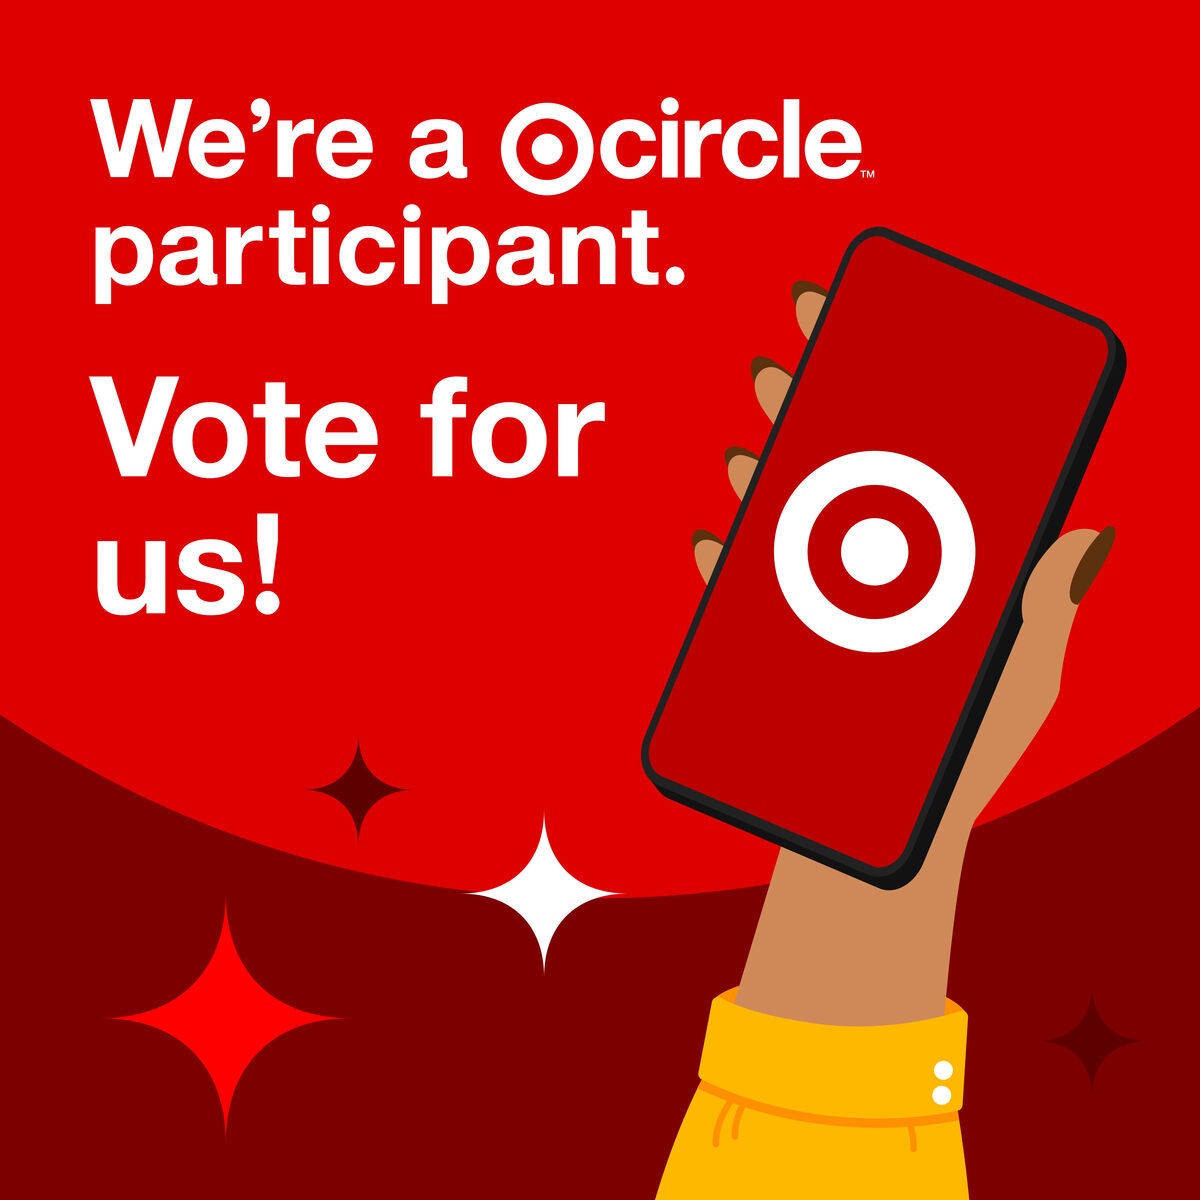 We're a target circle participant. Vote for us!